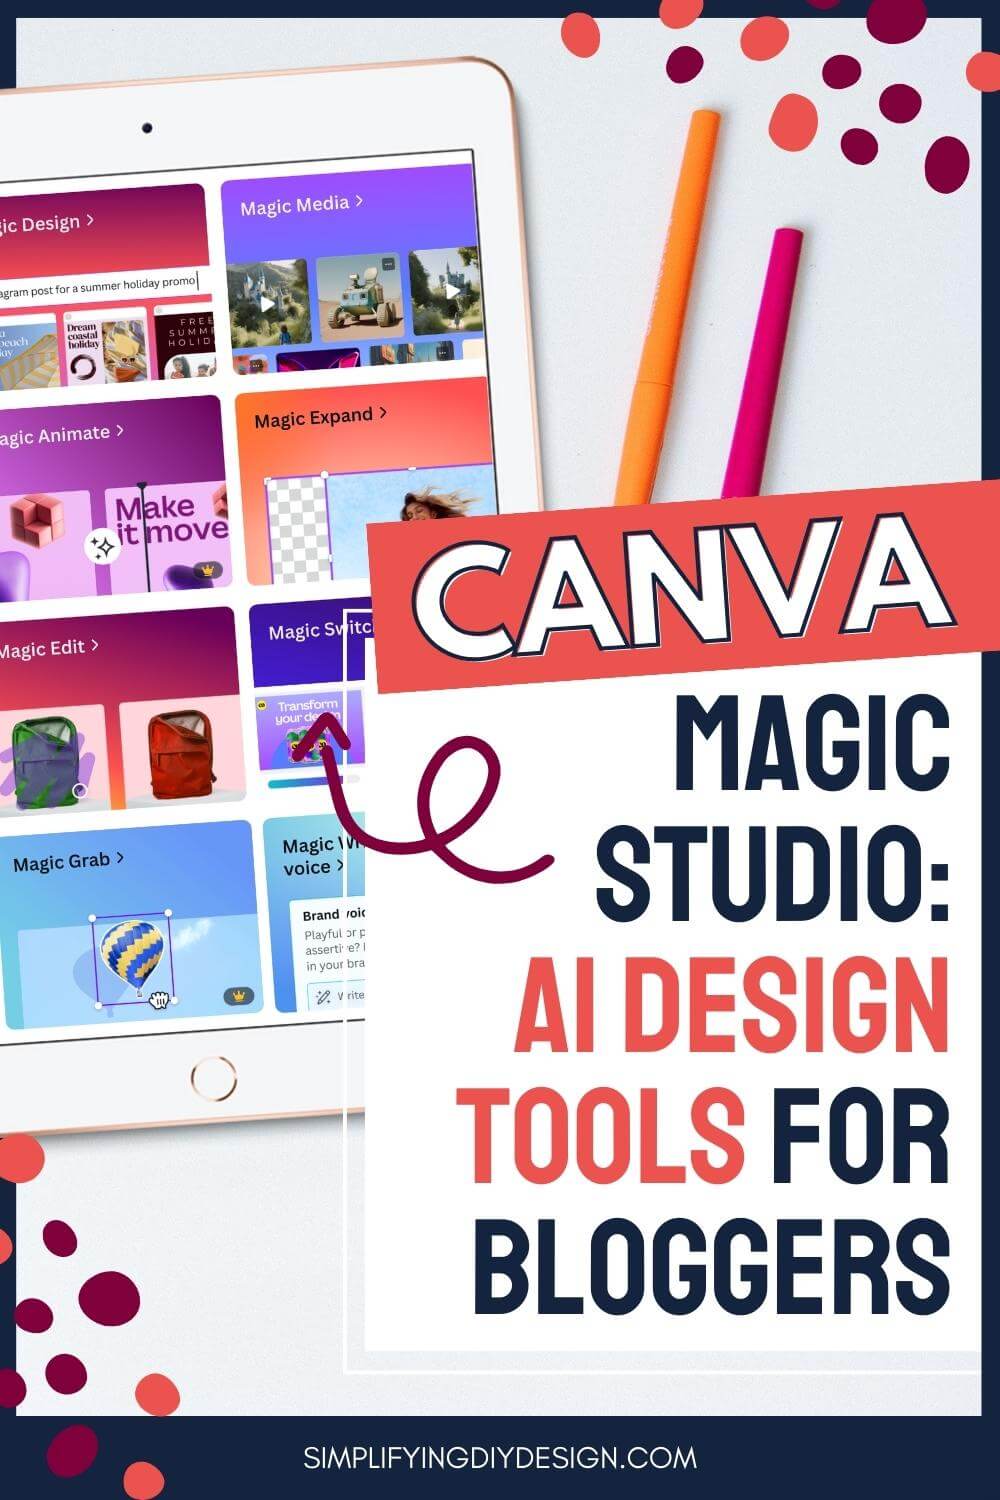 Canva Magic Studio combines the power of AI with its easy-to-use design interface to bring the best suite of design tools for bloggers EVER!